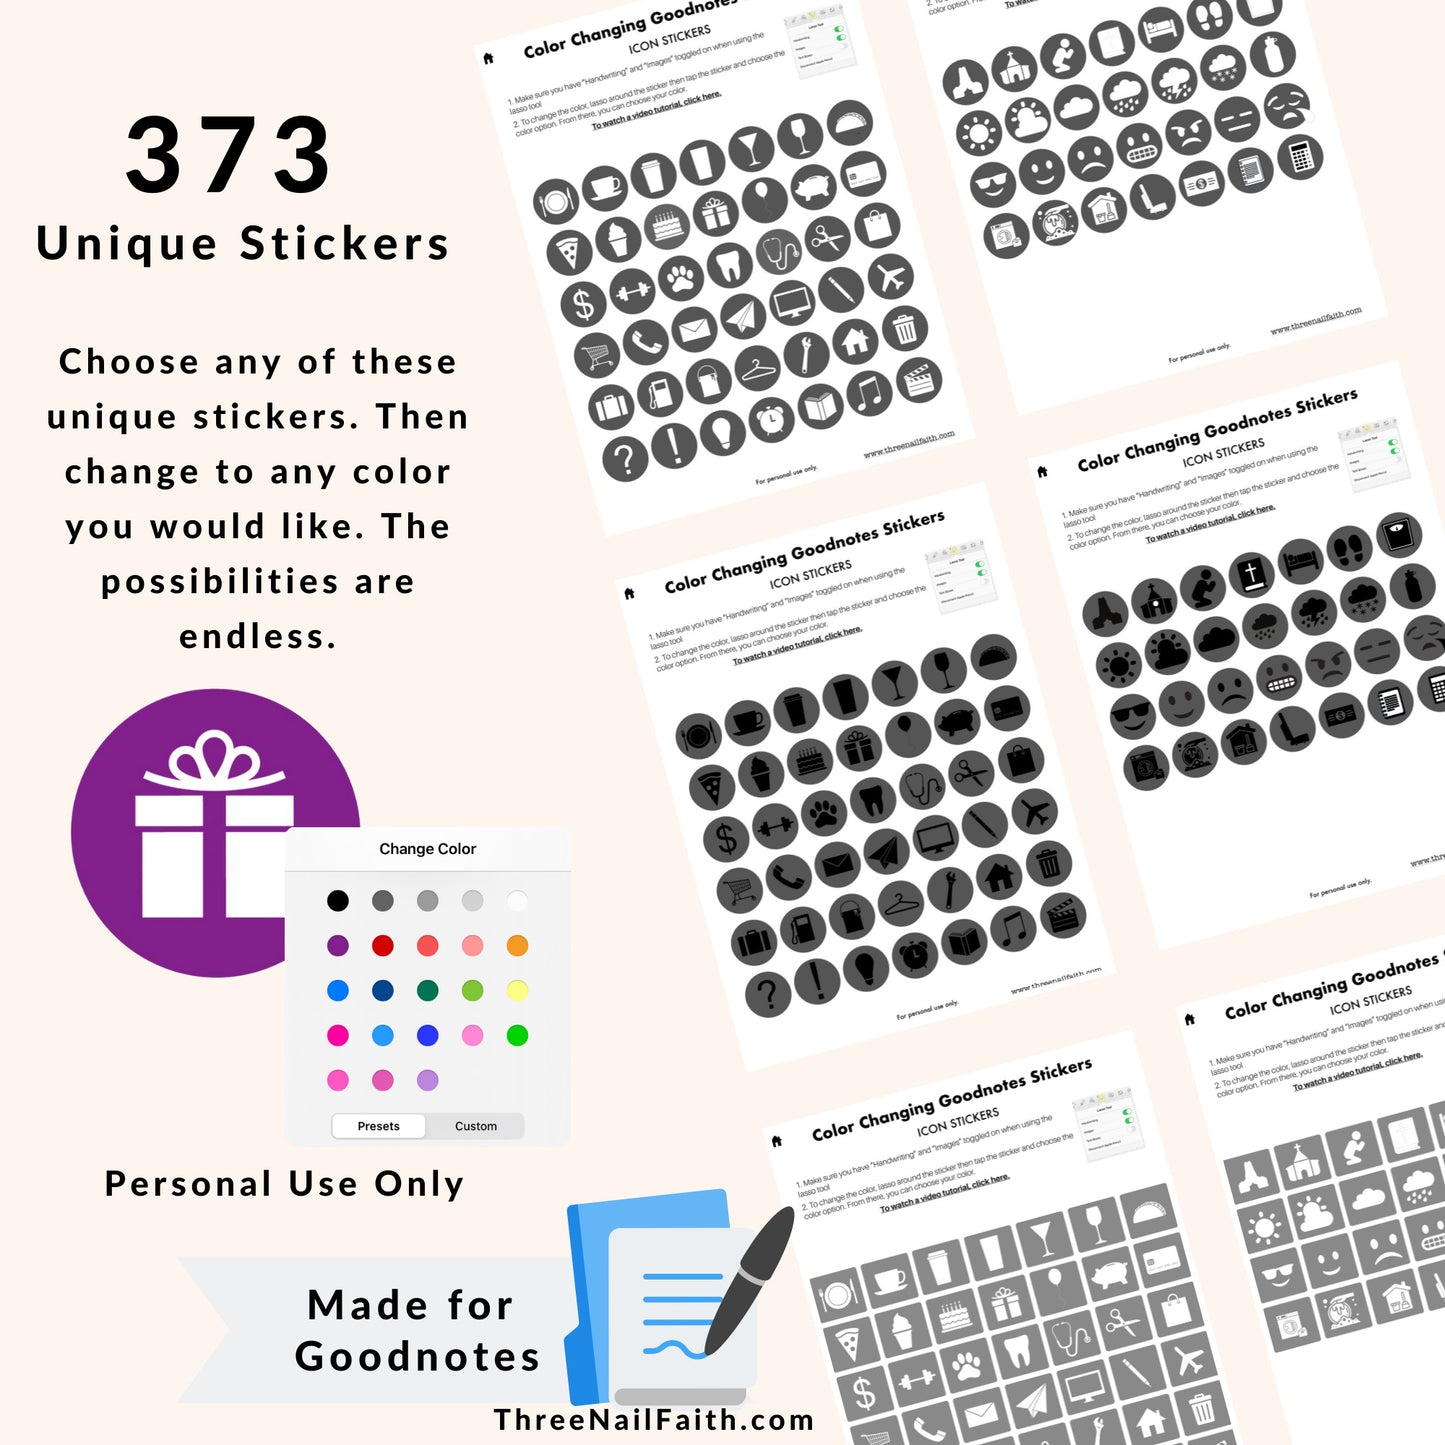 Color Changing Digital Sticker - Icons